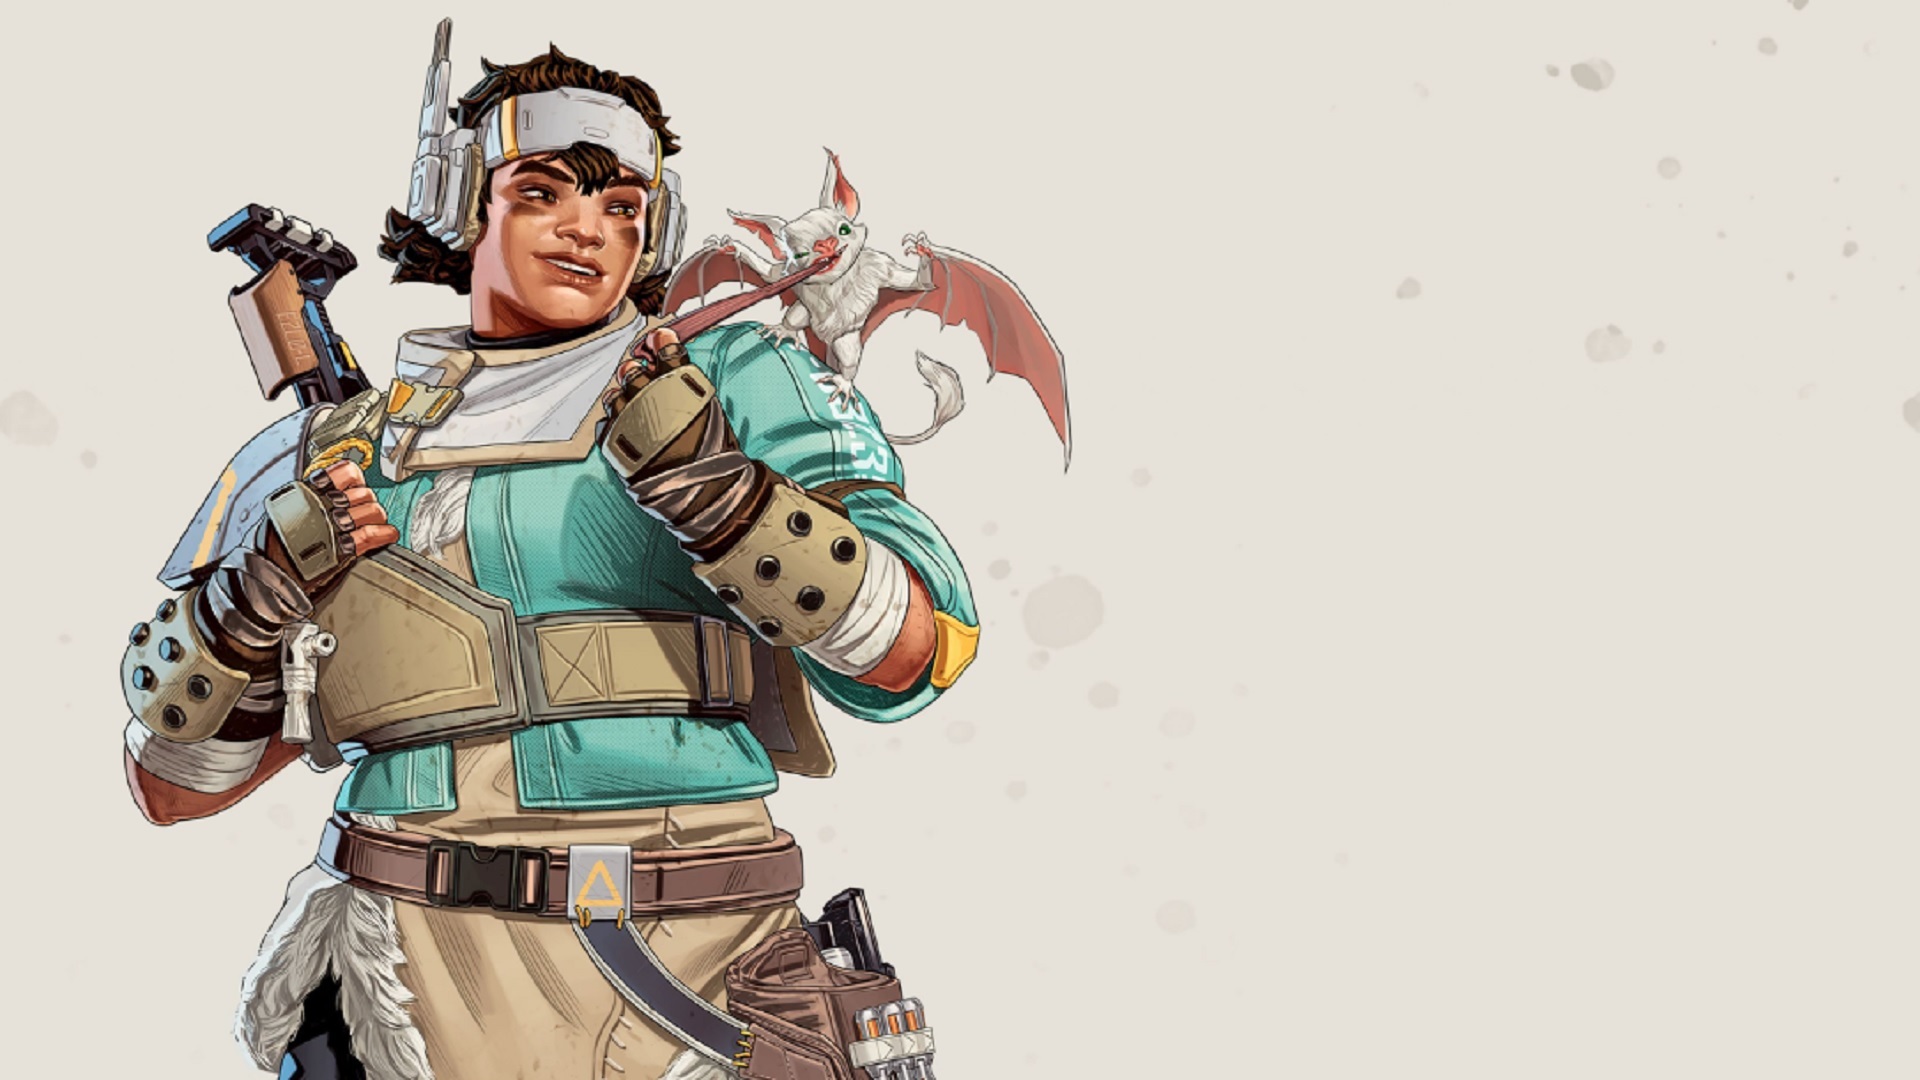 Apex Legends characters: All characters and their skills